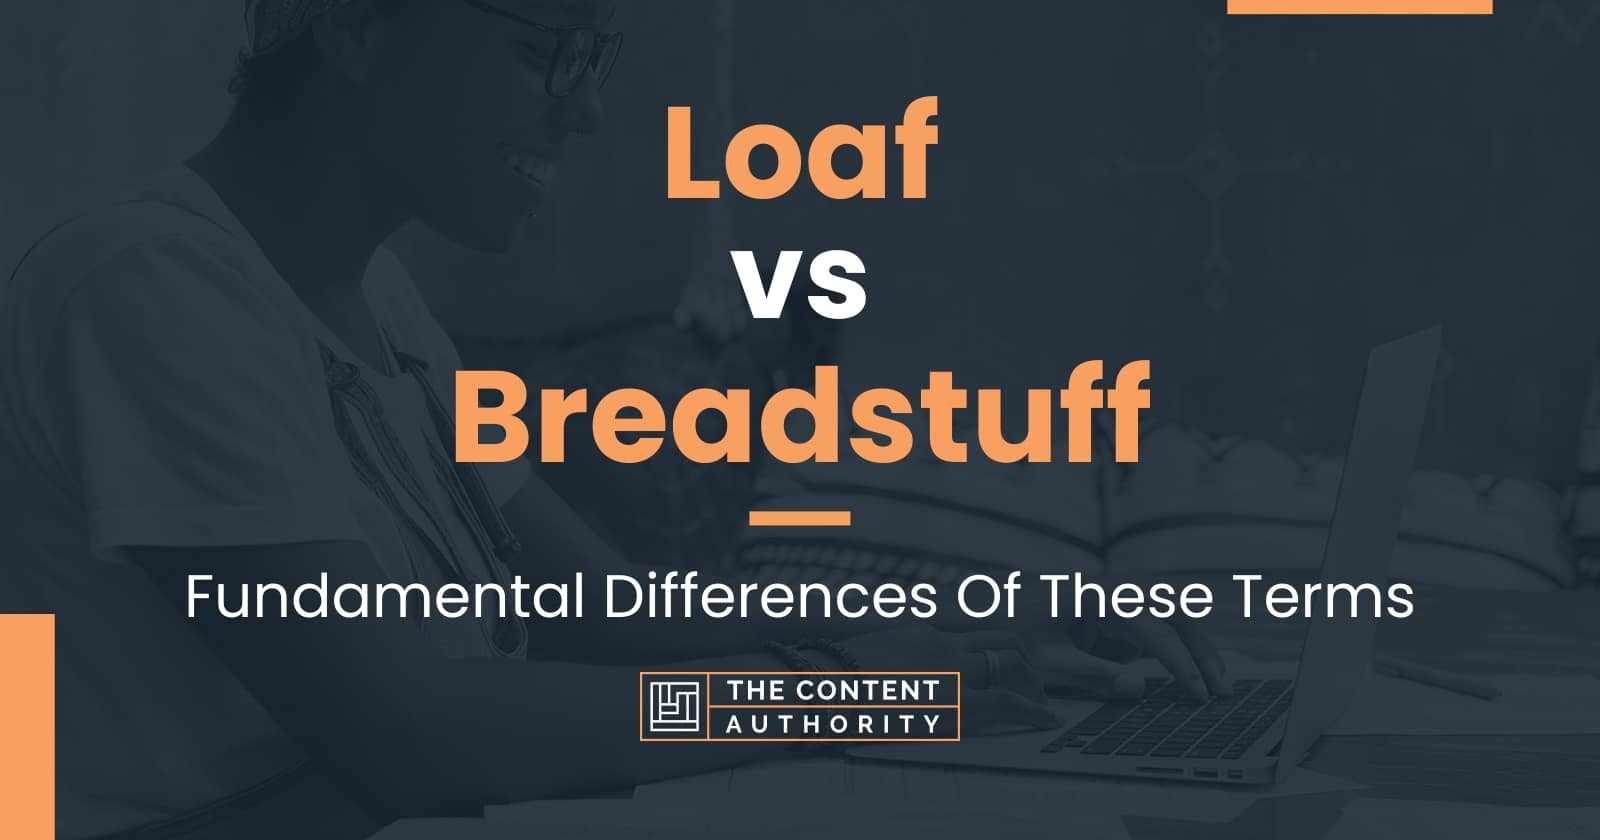 Loaf vs Breadstuff: Fundamental Differences Of These Terms